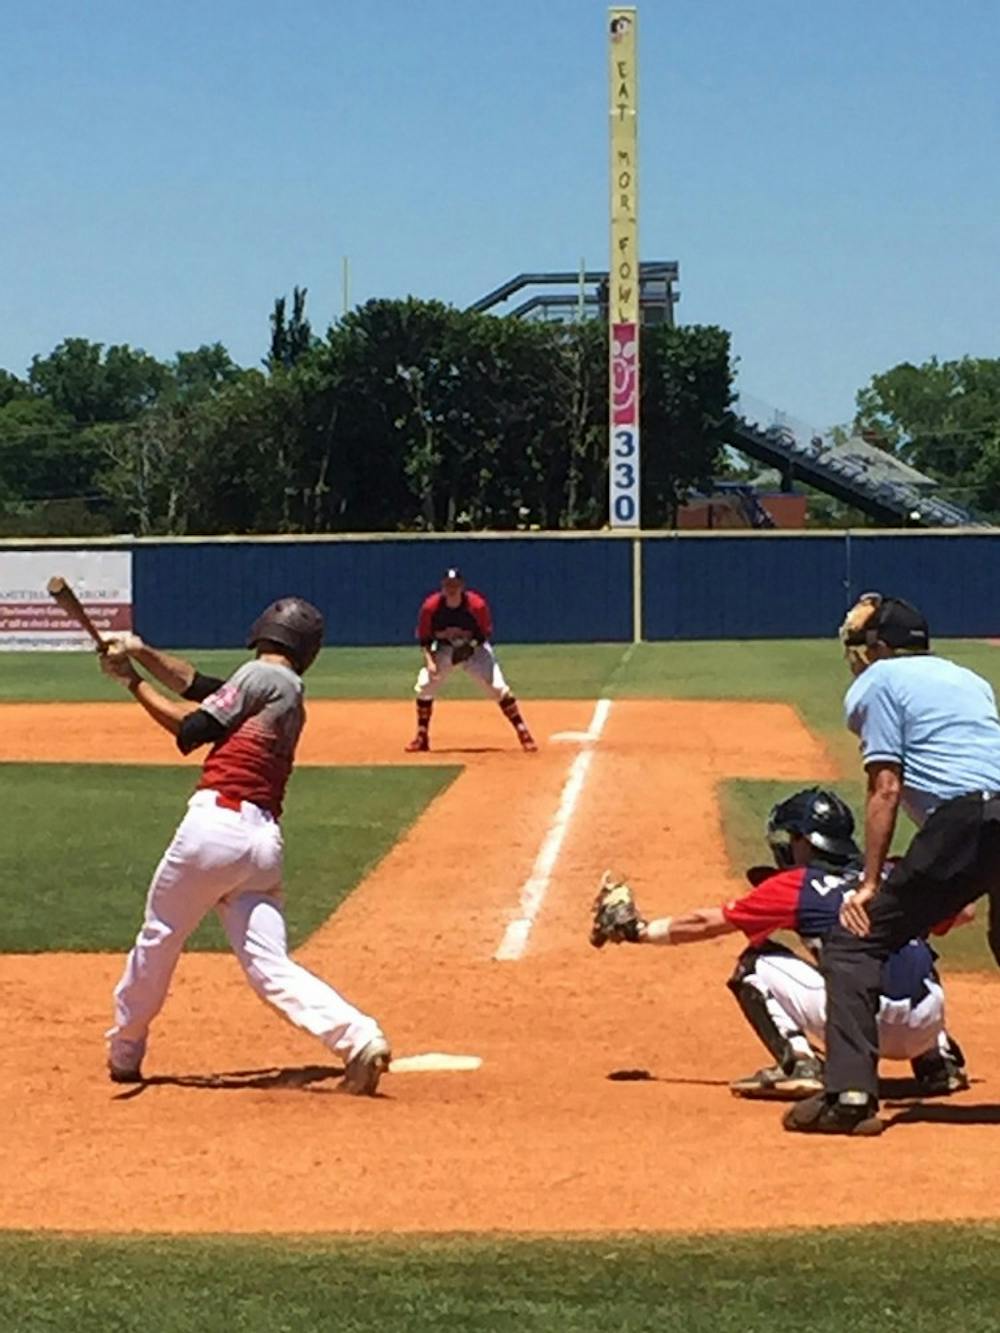 Youth baseball tournment at Middle Tennessee State University (Courtesy Photo of IU Newsroom).
